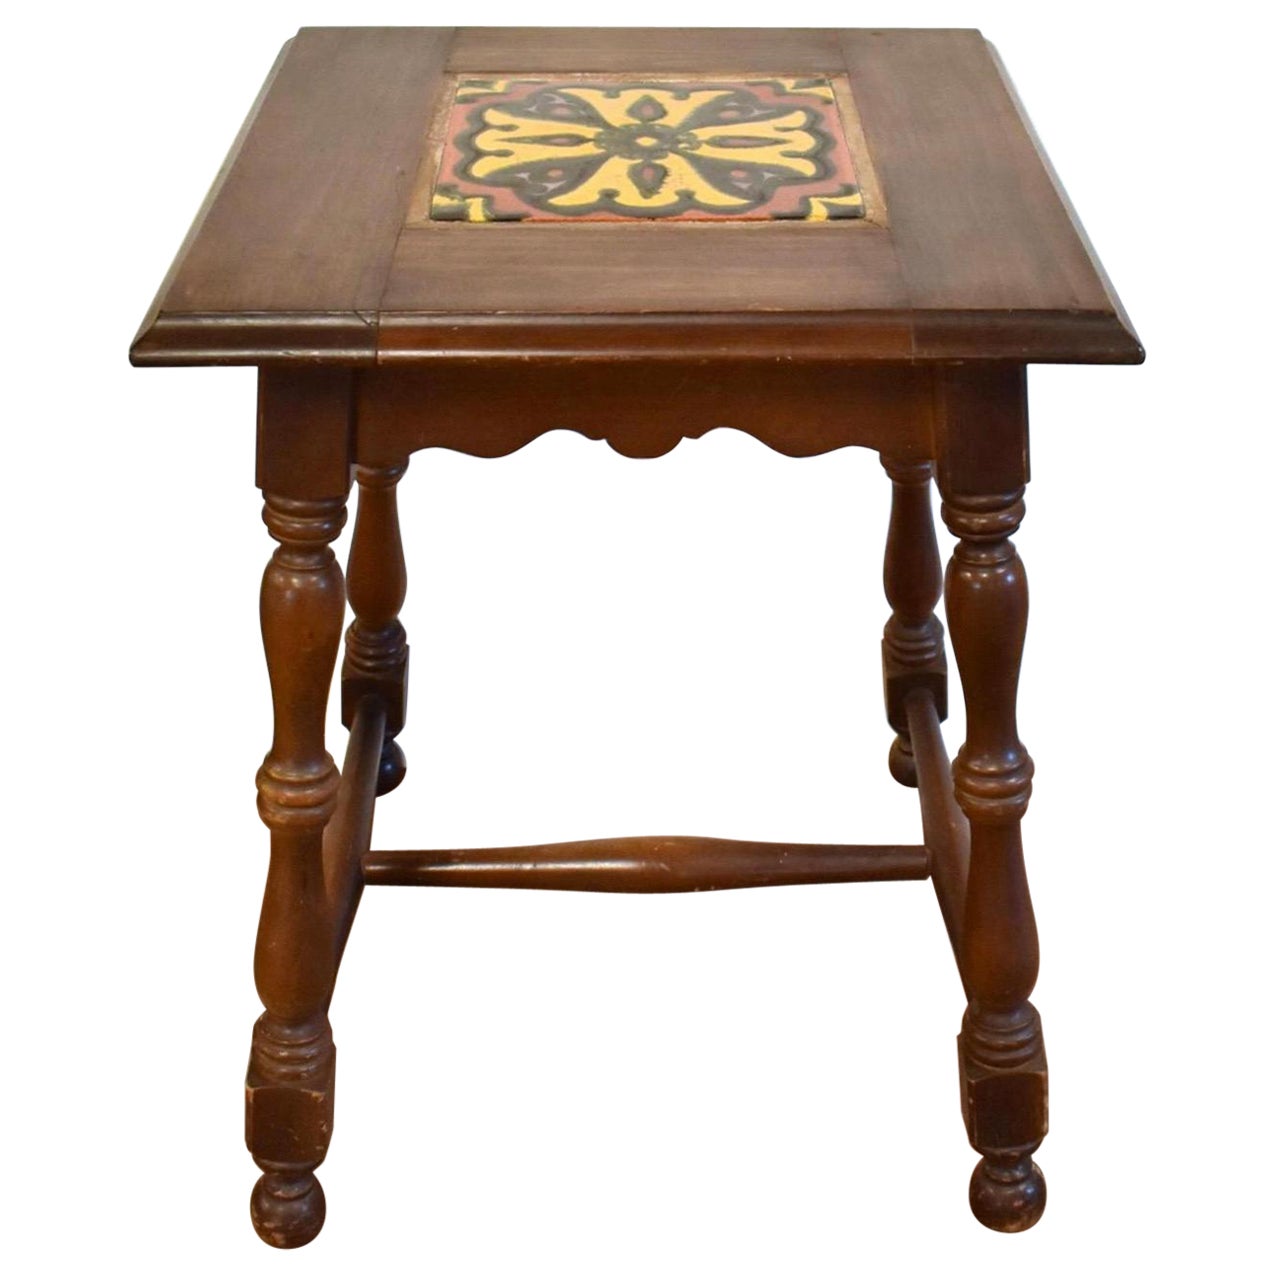 Antique California Catalina Style Tile Top Table For Sale